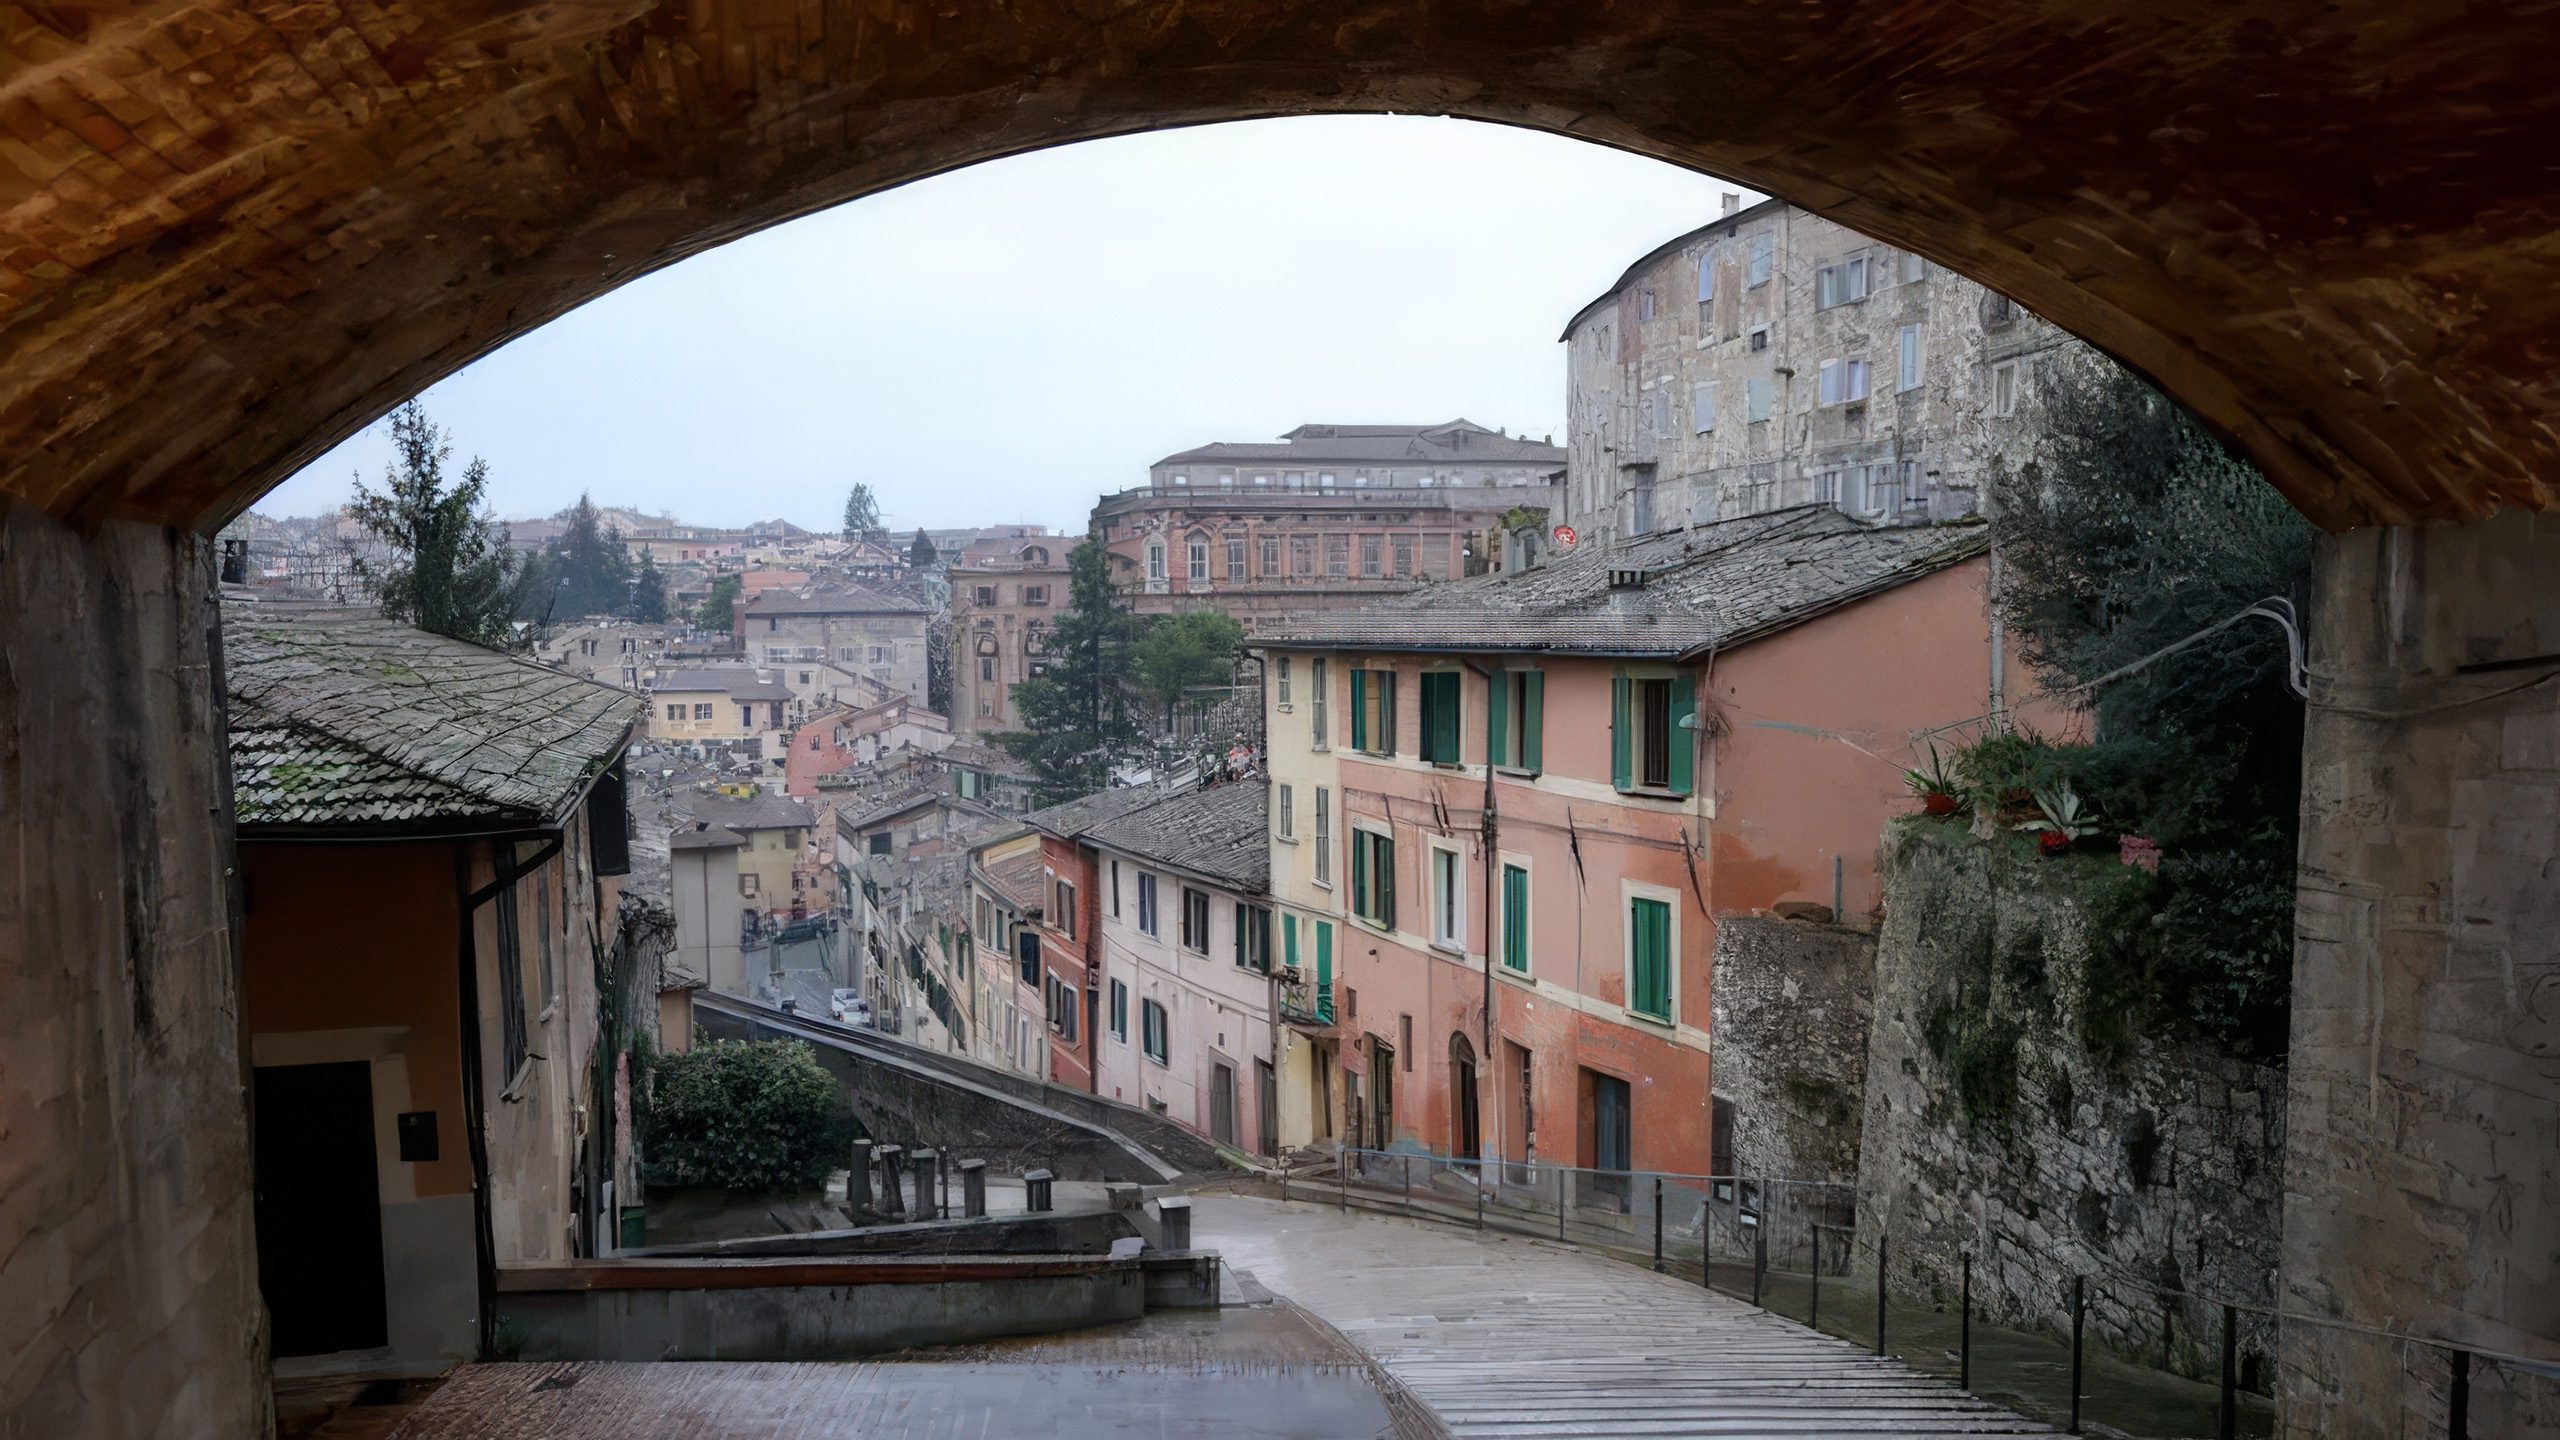 The city of Perugia, Italy | Davidsbeenhere